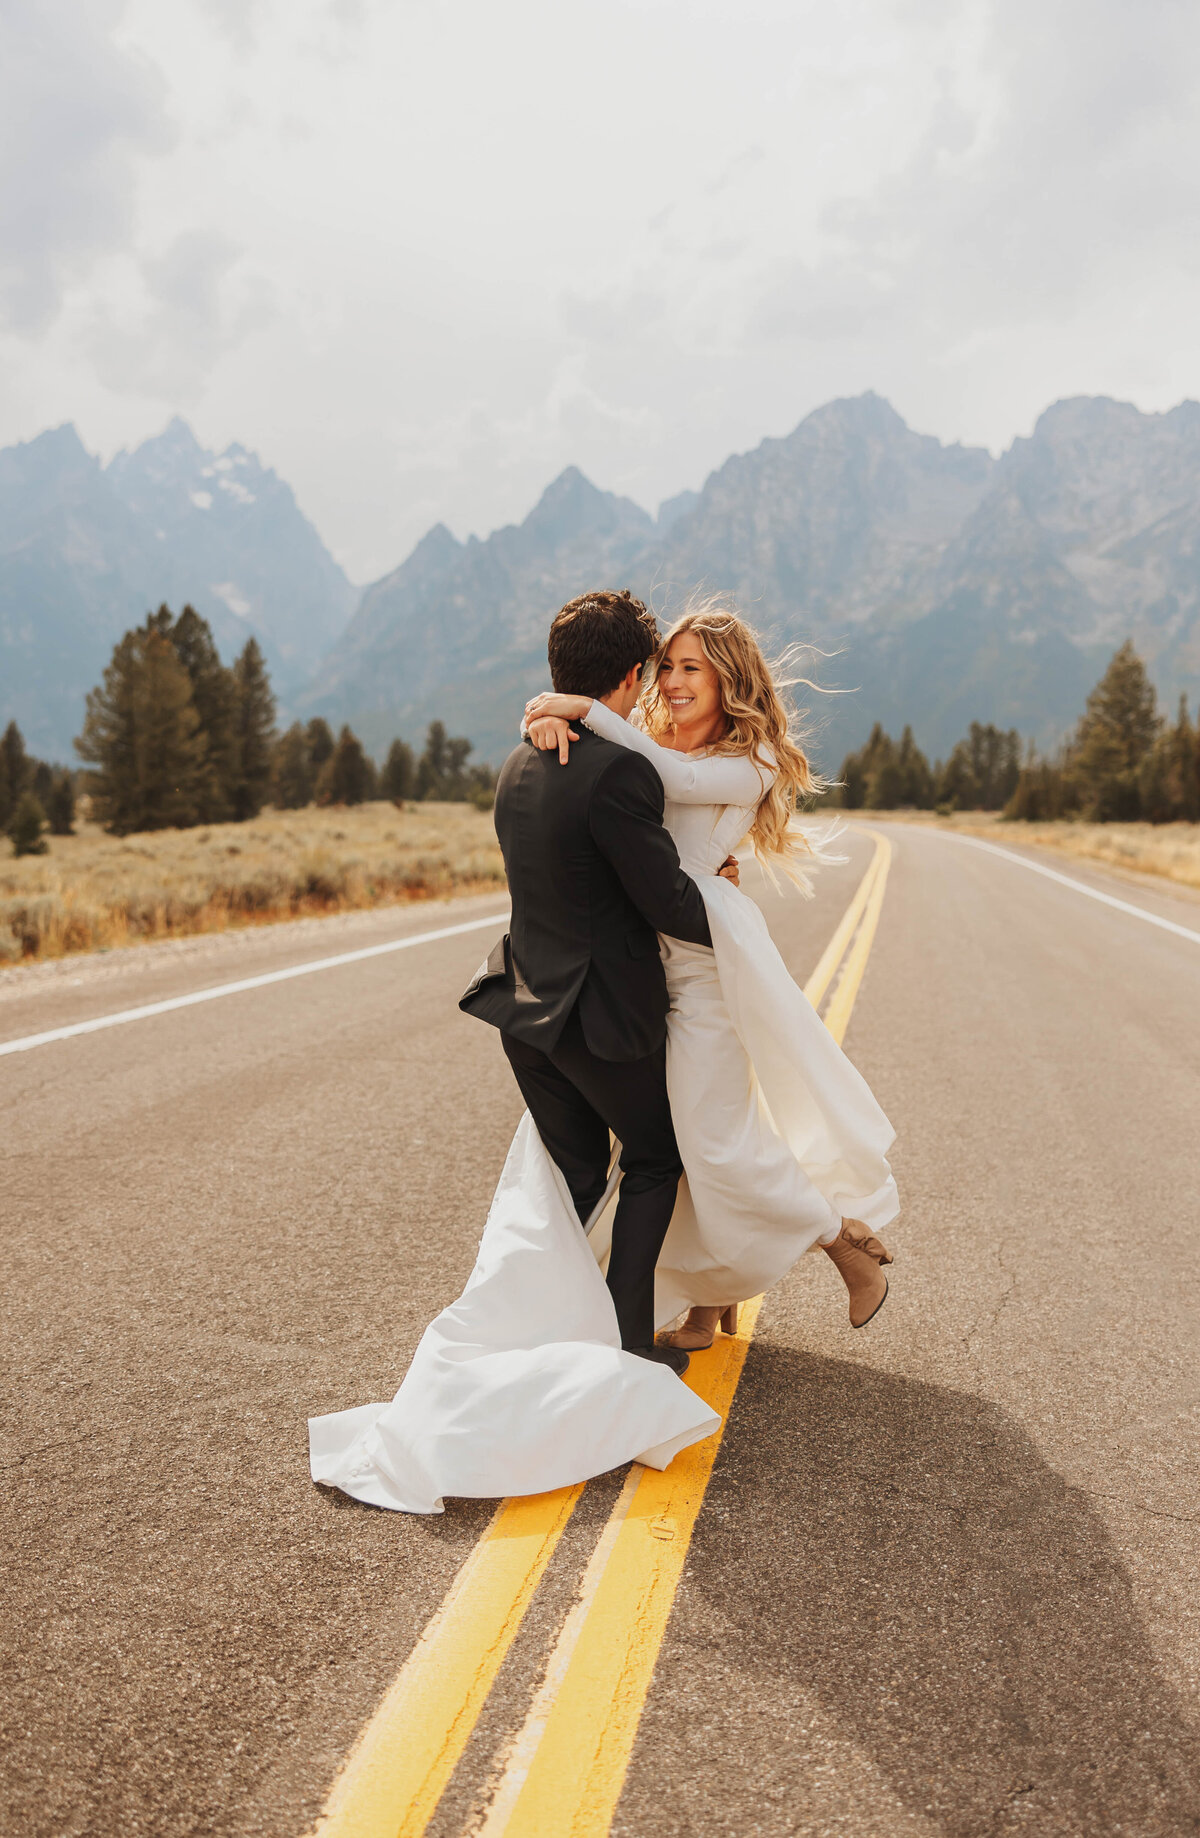 bride and groom embracing in road